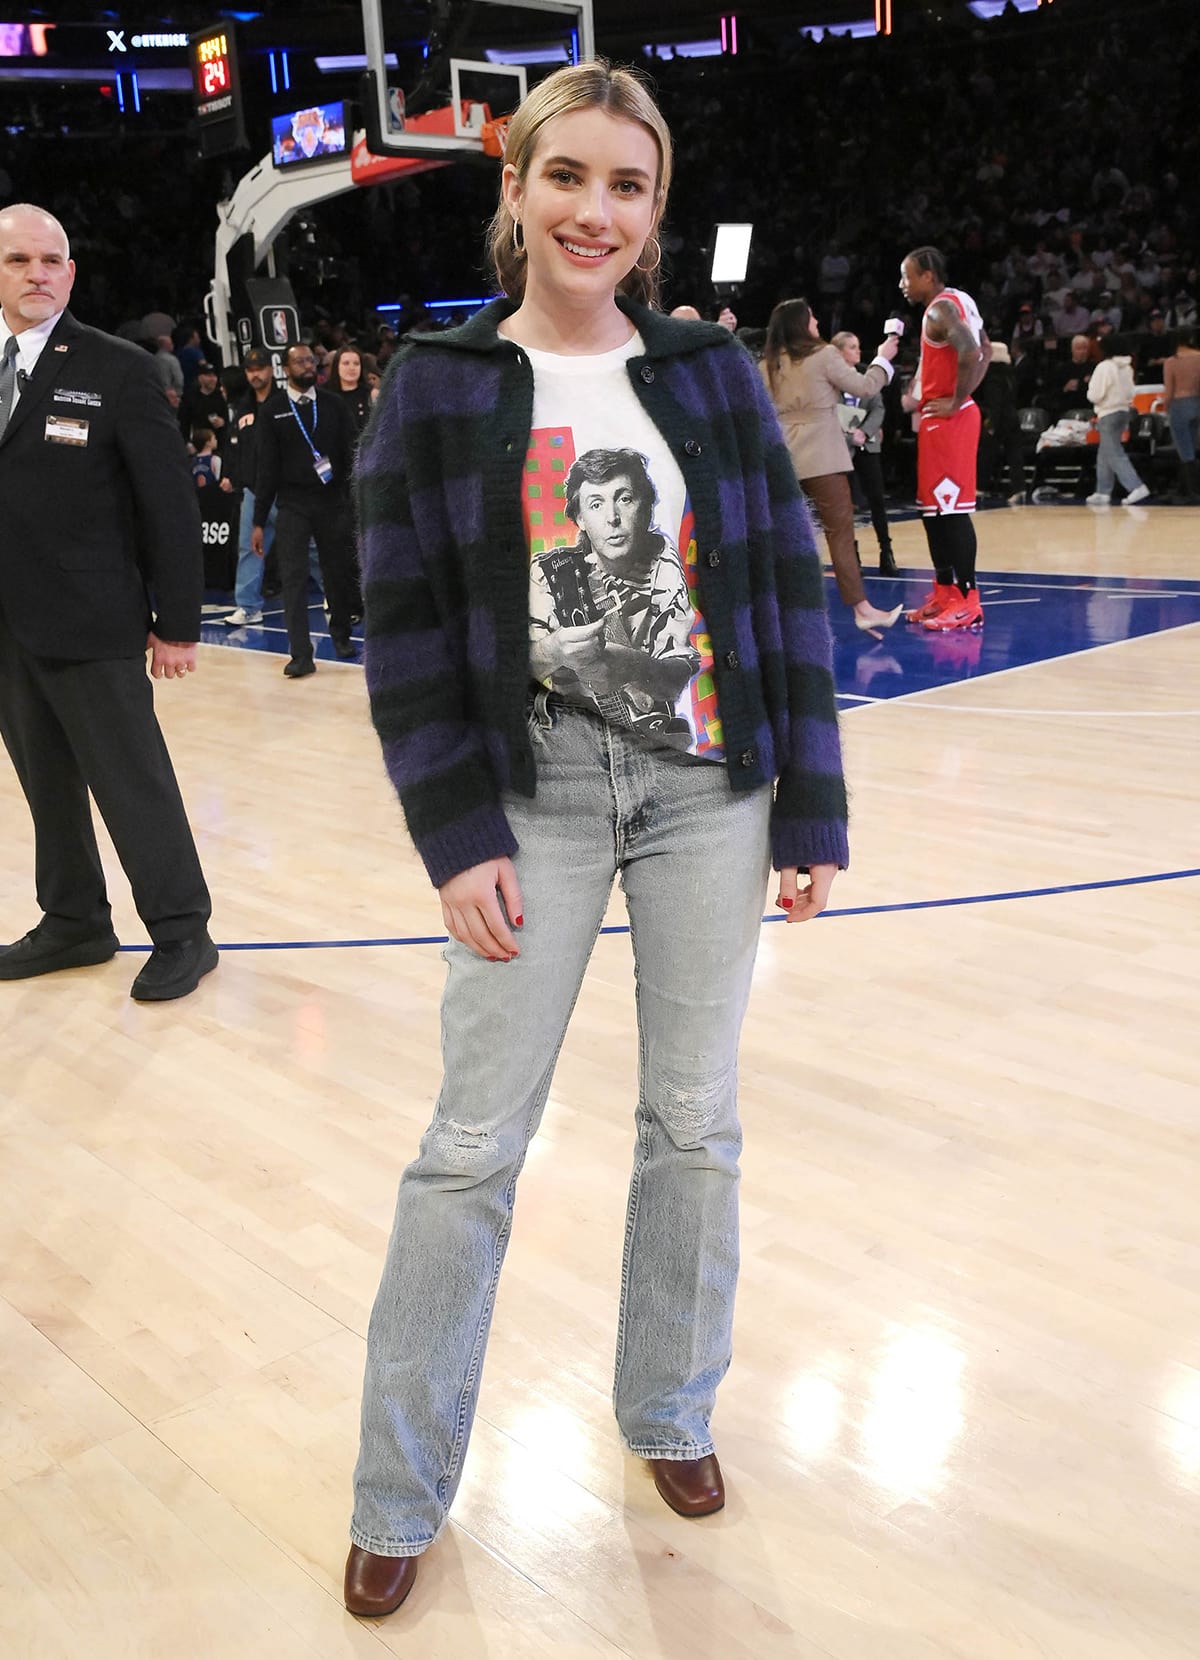 Emma Roberts looks stylish in a purple and black cardigan, vintage Paul McCartney graphic tee, and light-wash denim jeans as she sits courtside at the Madison Square Garden